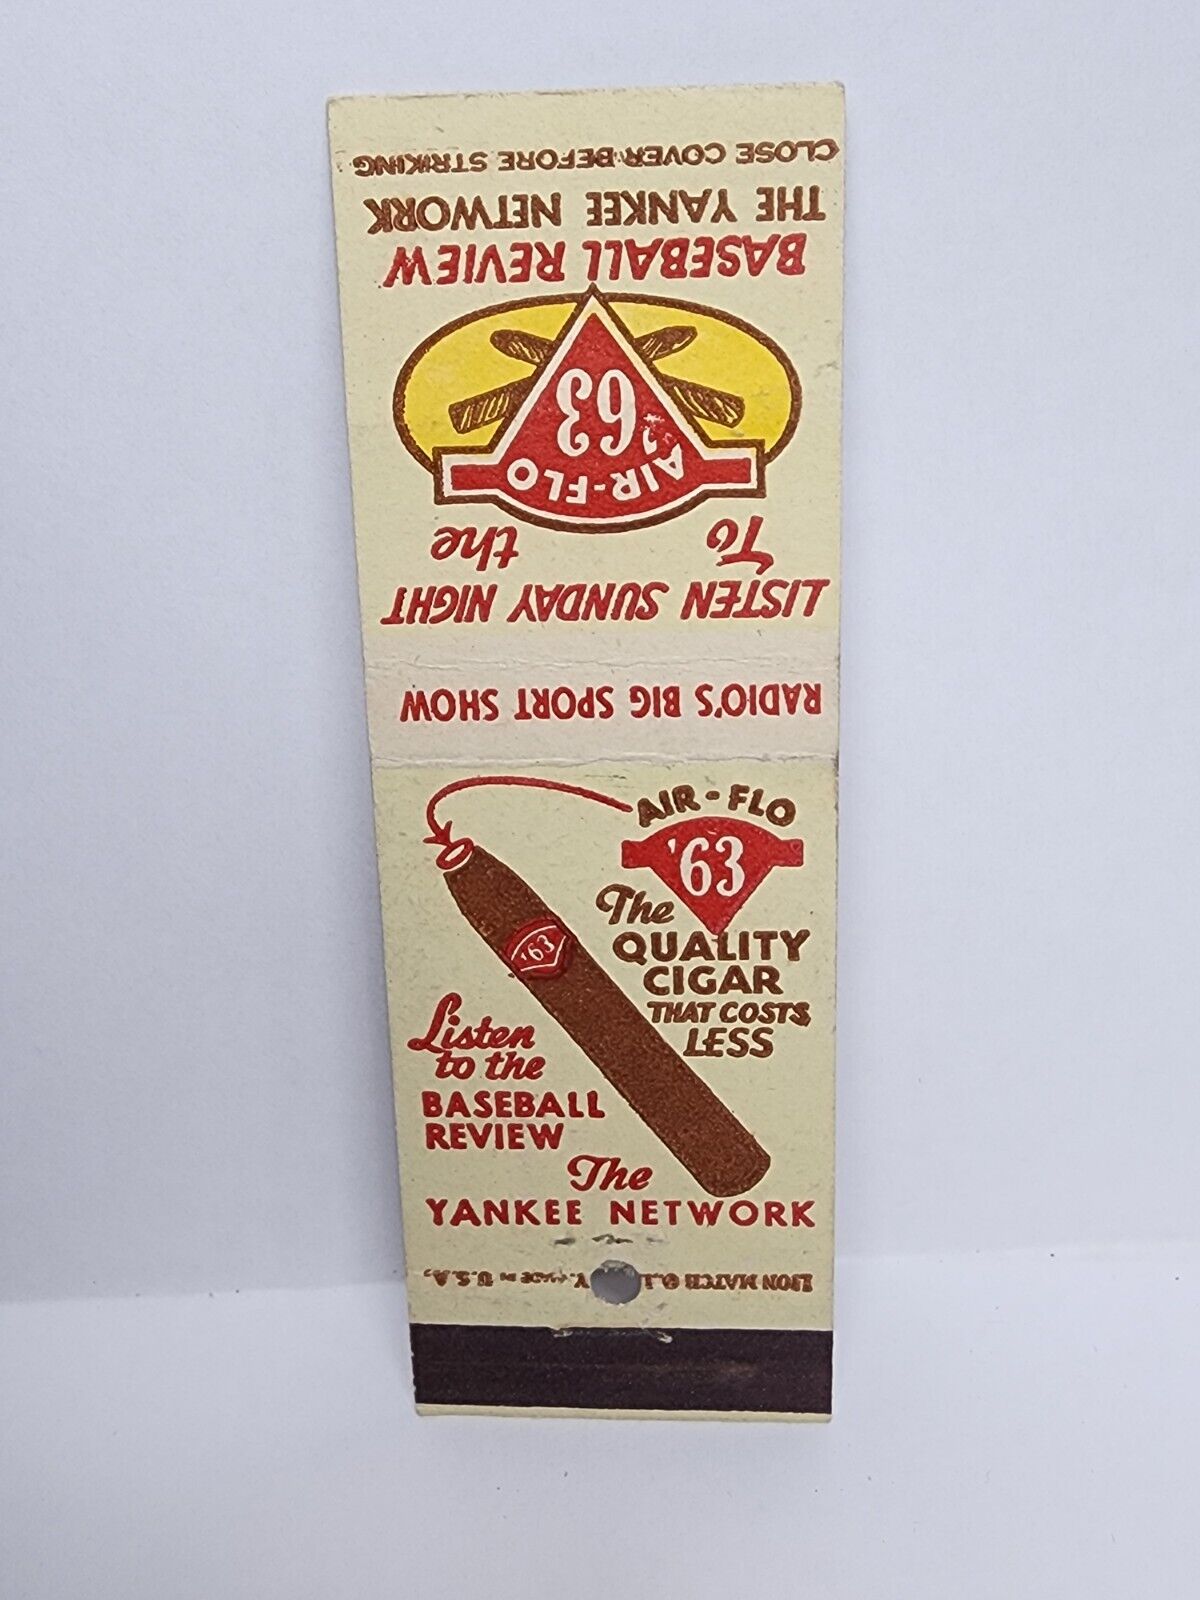 Vintage Matchbook Cover - THE YANKEE NETWORK Cigar Baseball Radio Sports Review